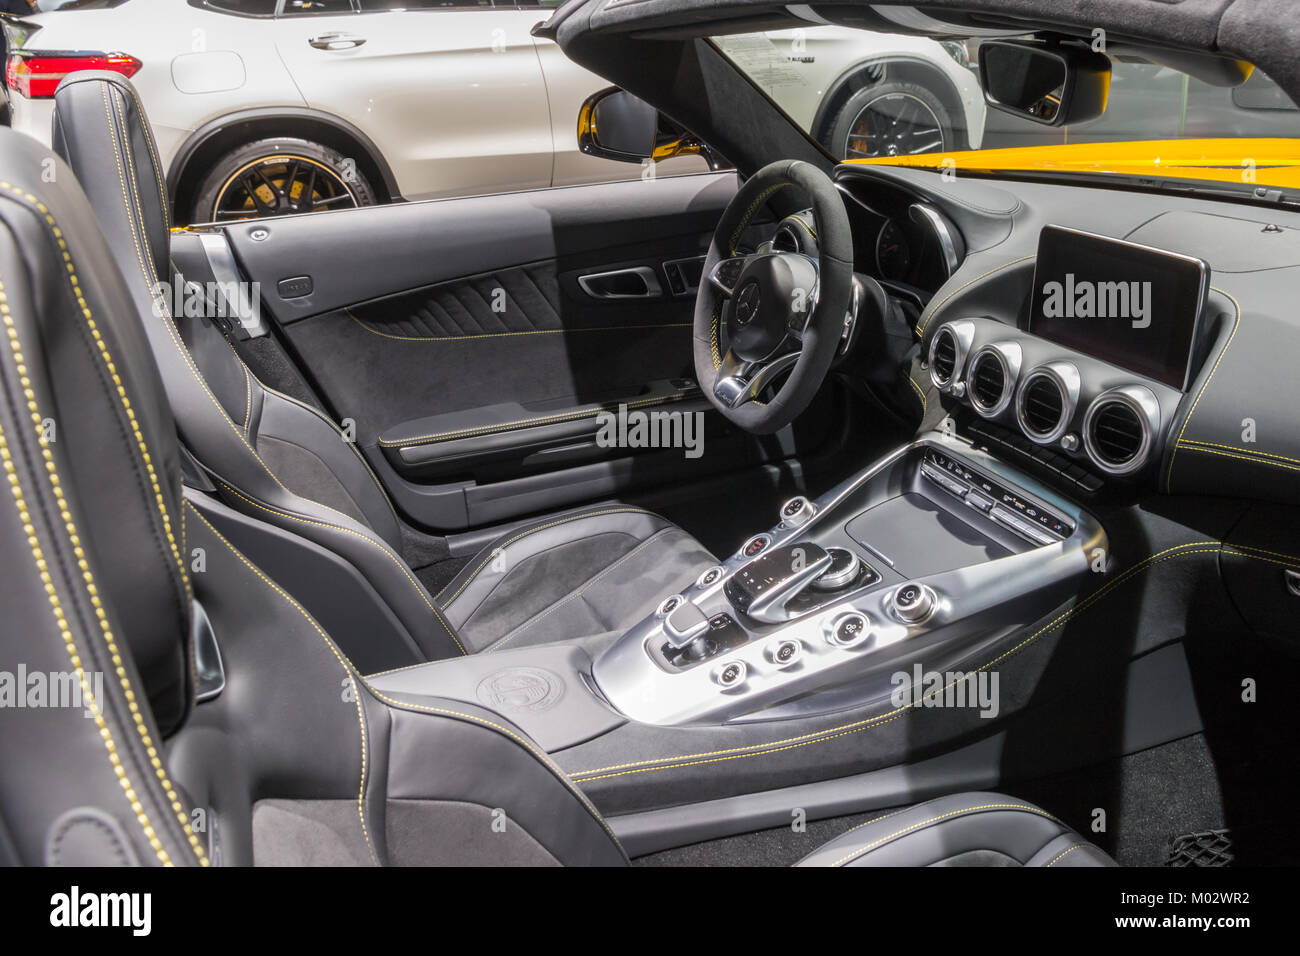 BRUSSELS - JAN 10, 2018: Interior of a Mercedes AMG SLS GT sports car showcased at the Brussels Motor Show. Stock Photo